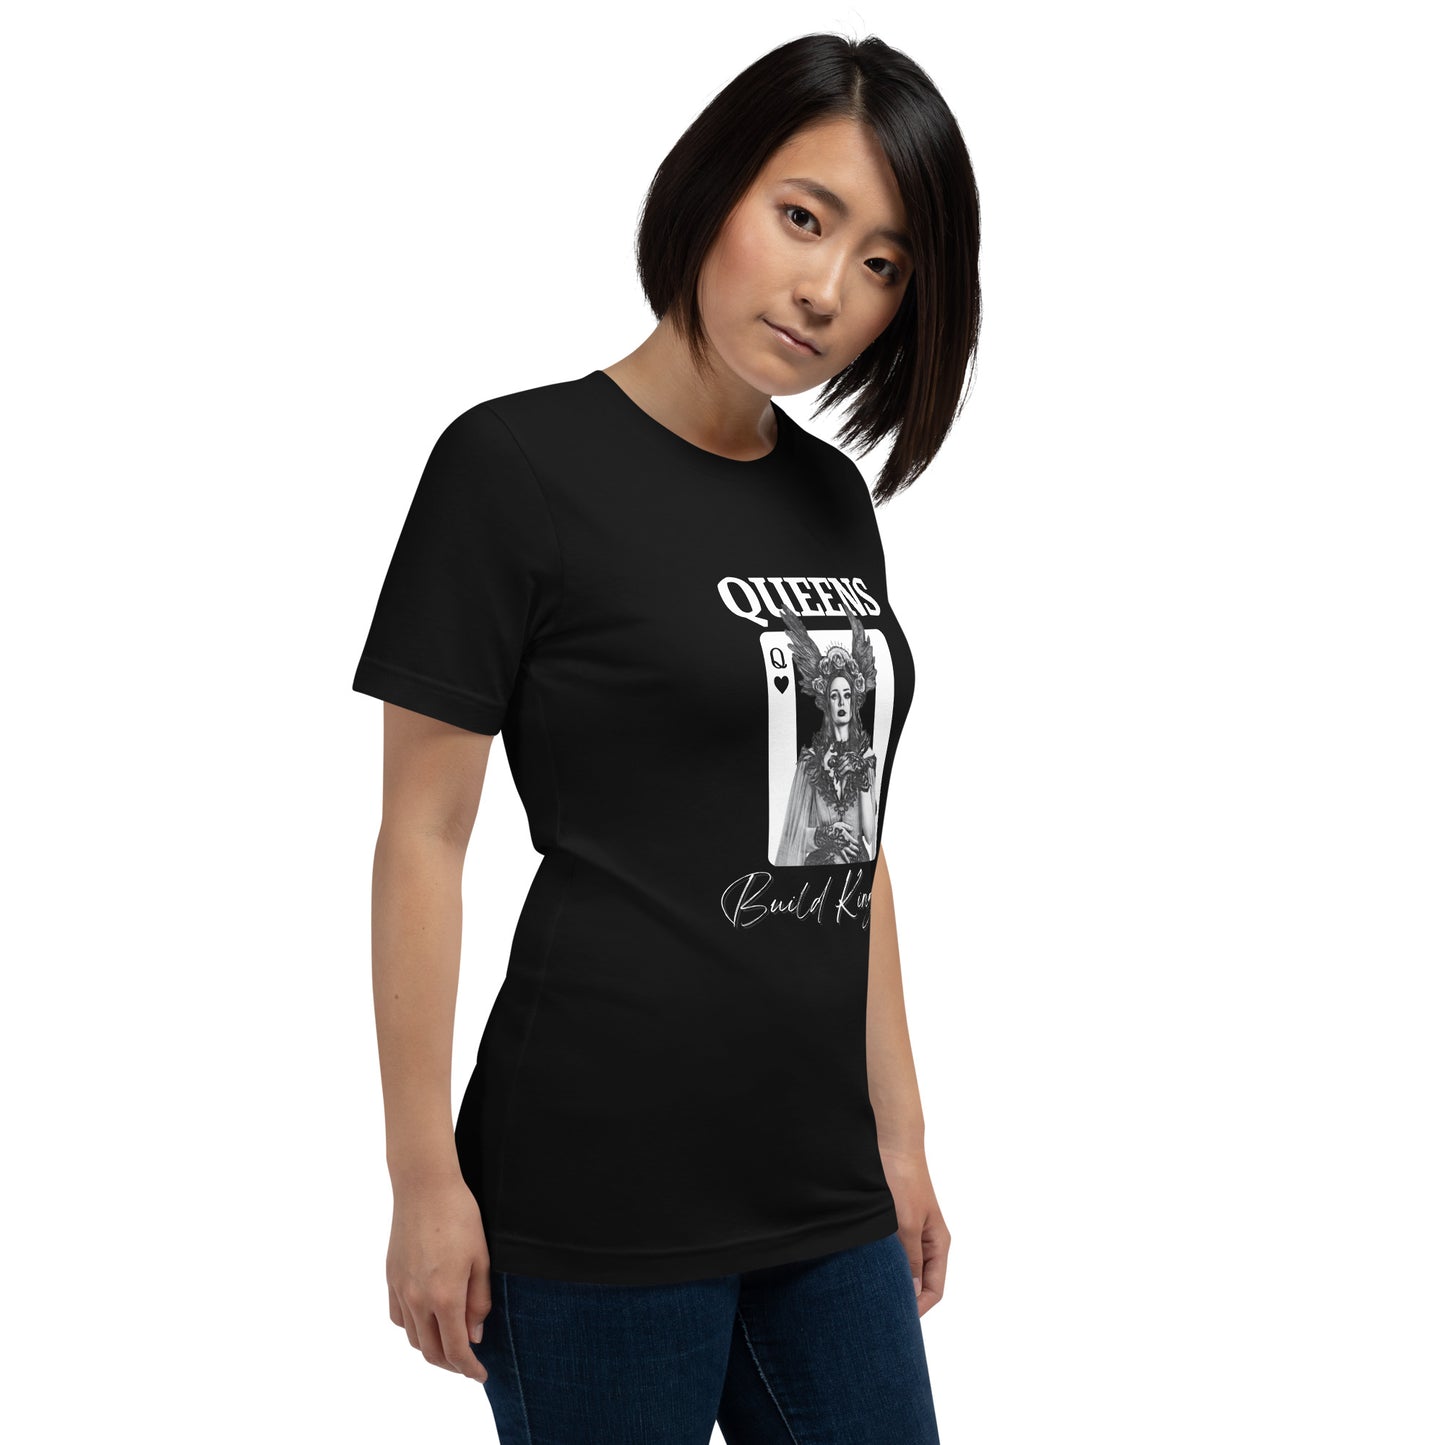 Queens Build Kingdoms Black shirt featuring an angel woman and a queen of heart card.